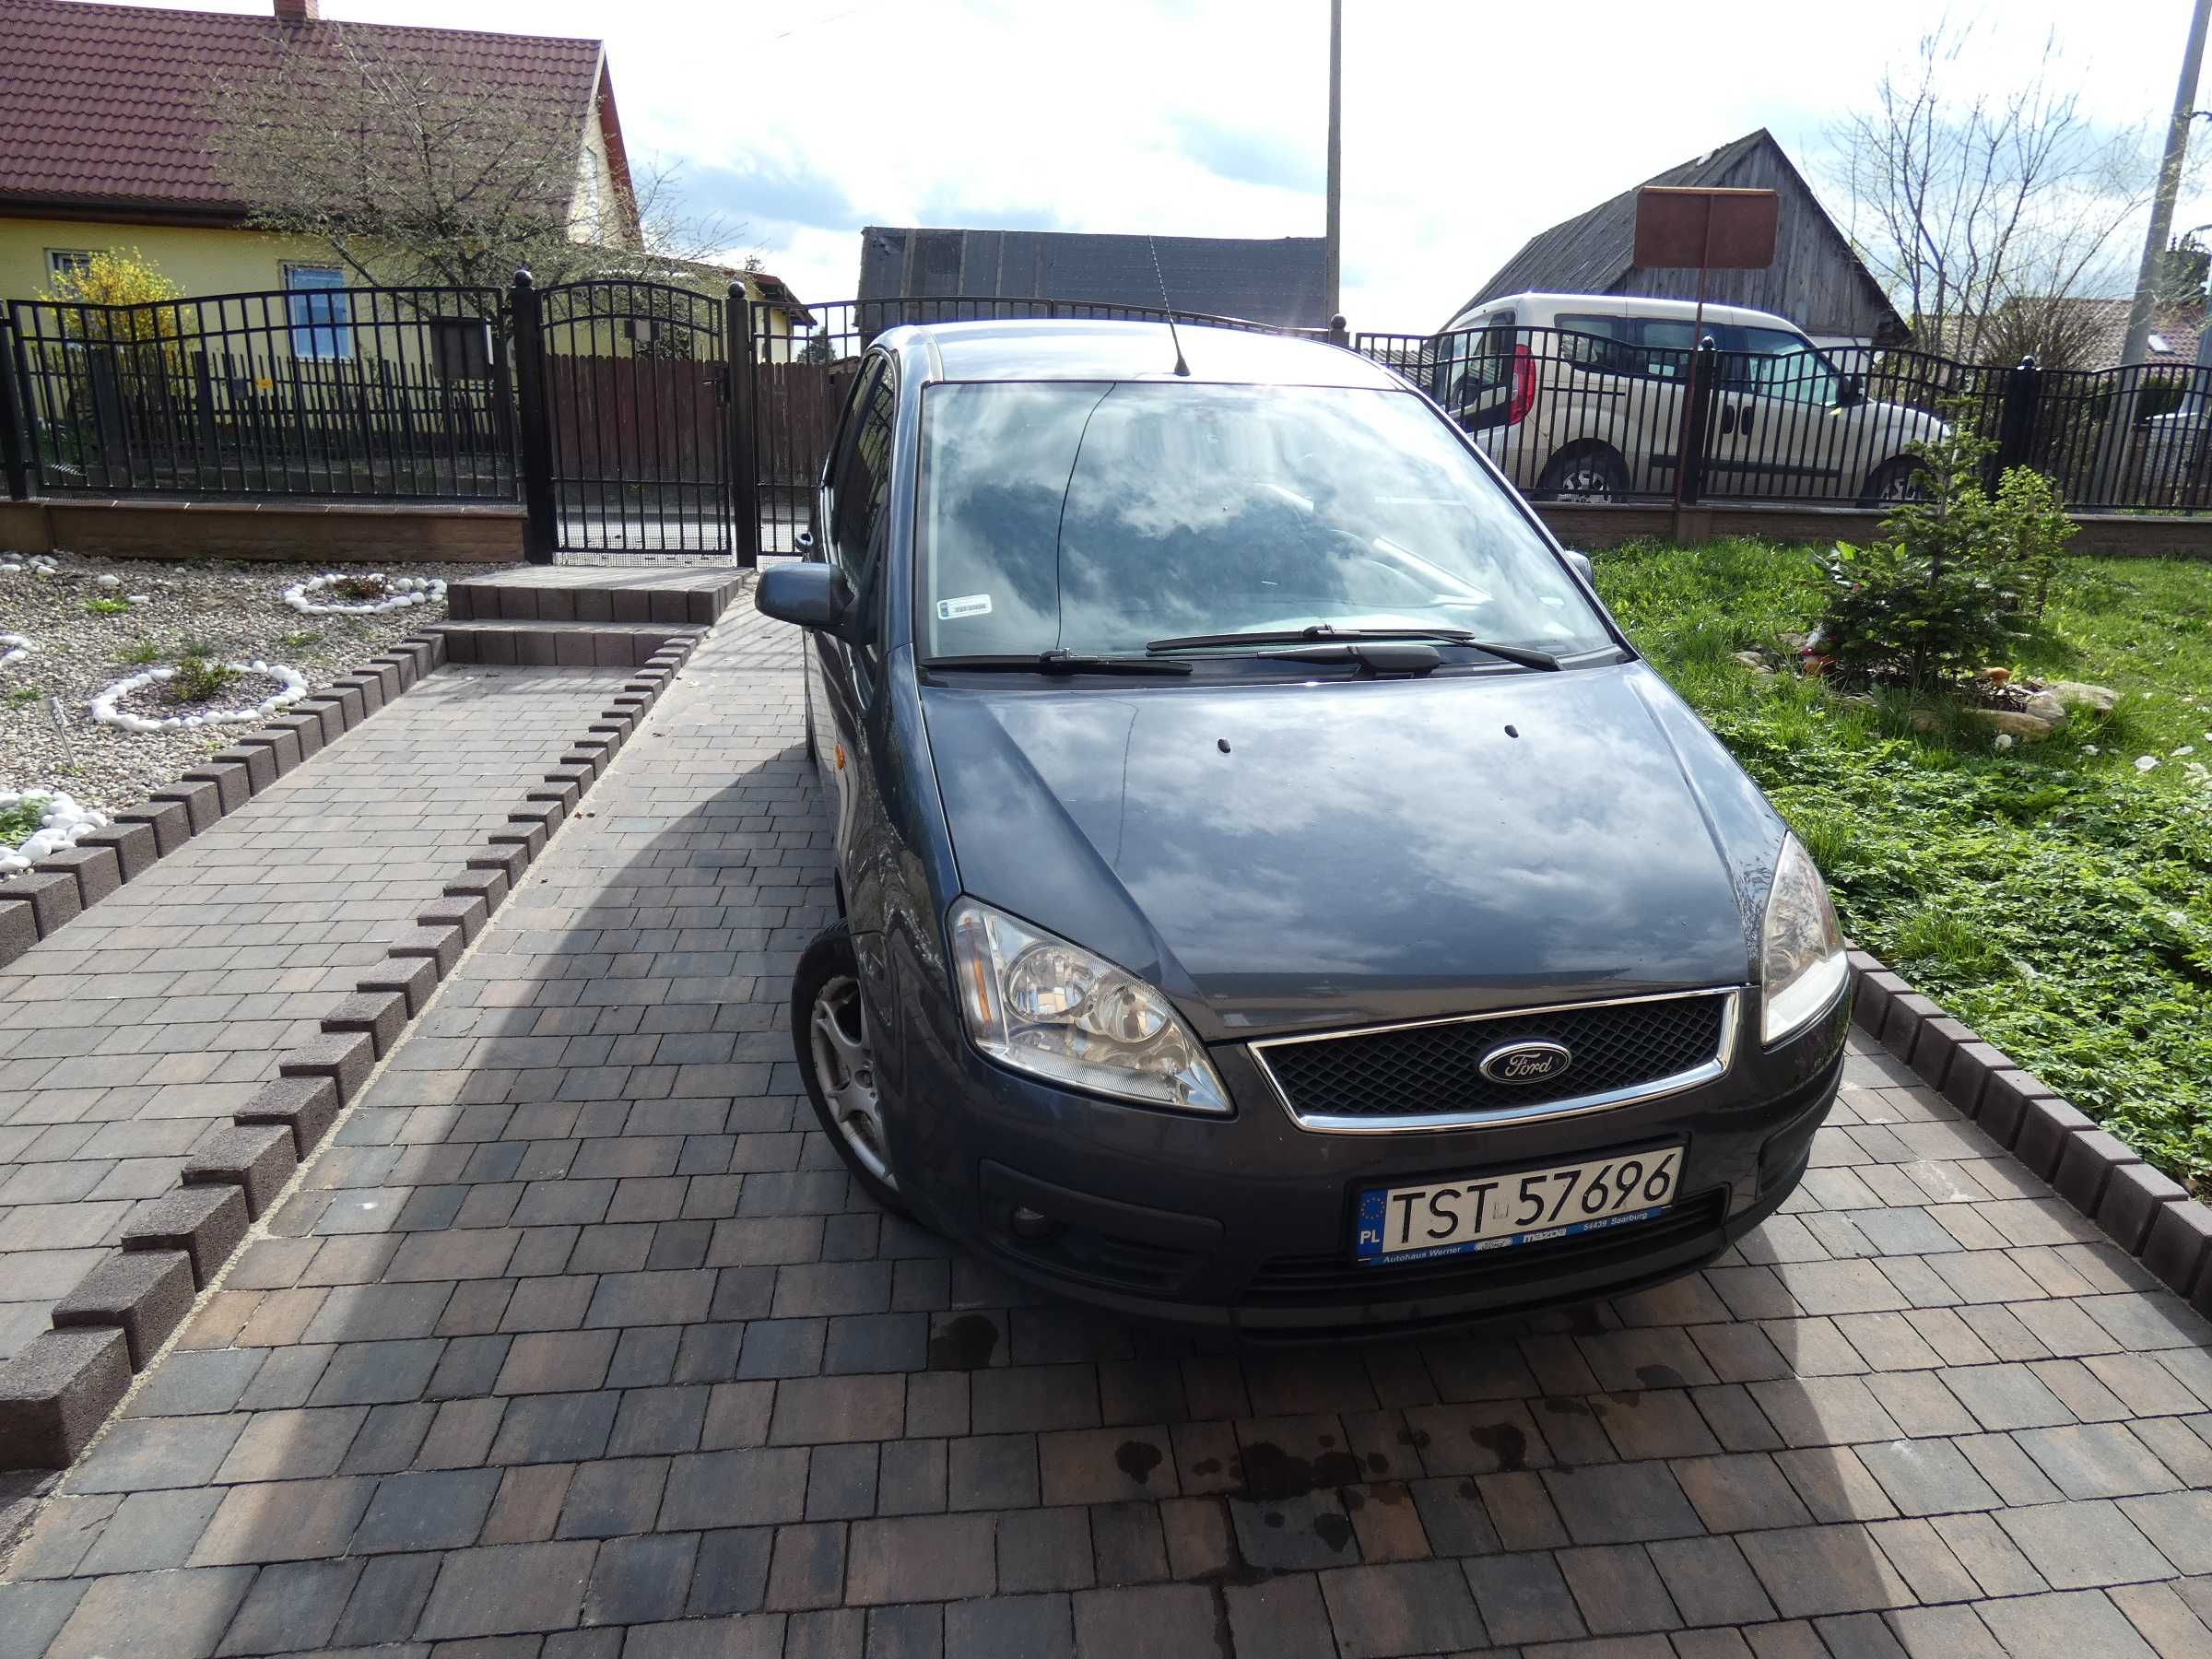 Ford Focus C-Max 1.8 benzyna rok 2004